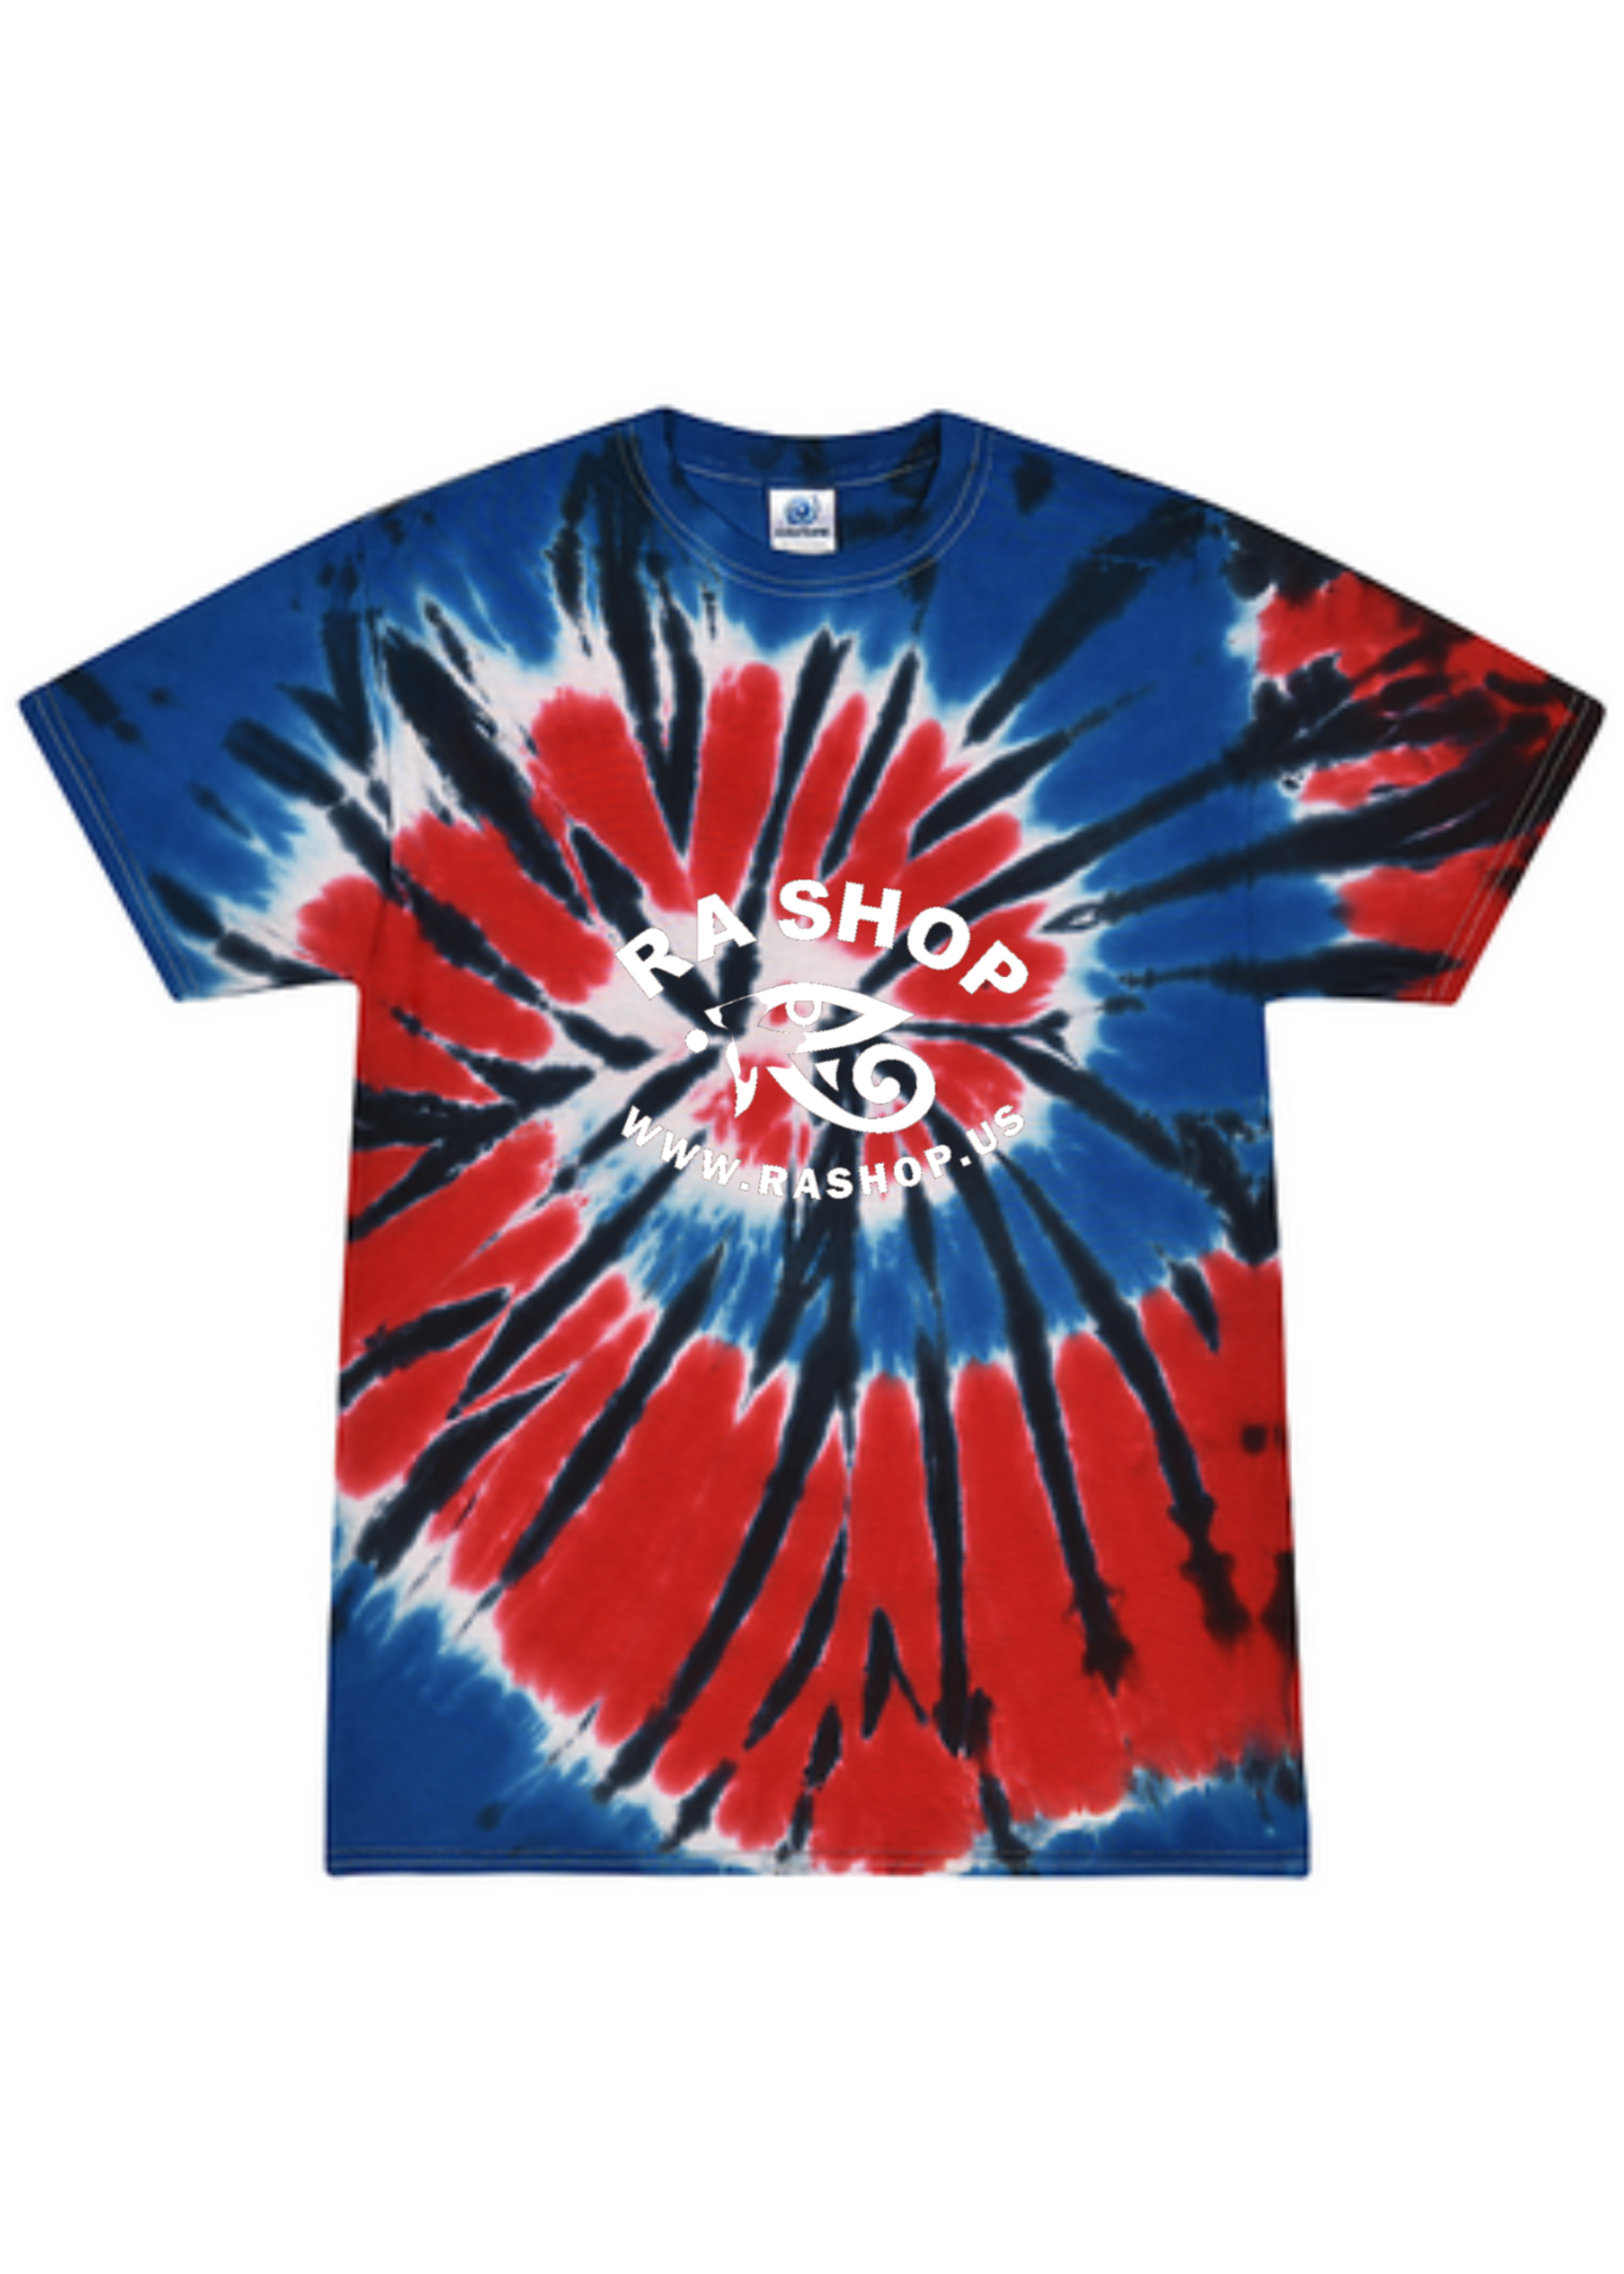 Ra Shop Tie Dye T-Shirt Independence Md